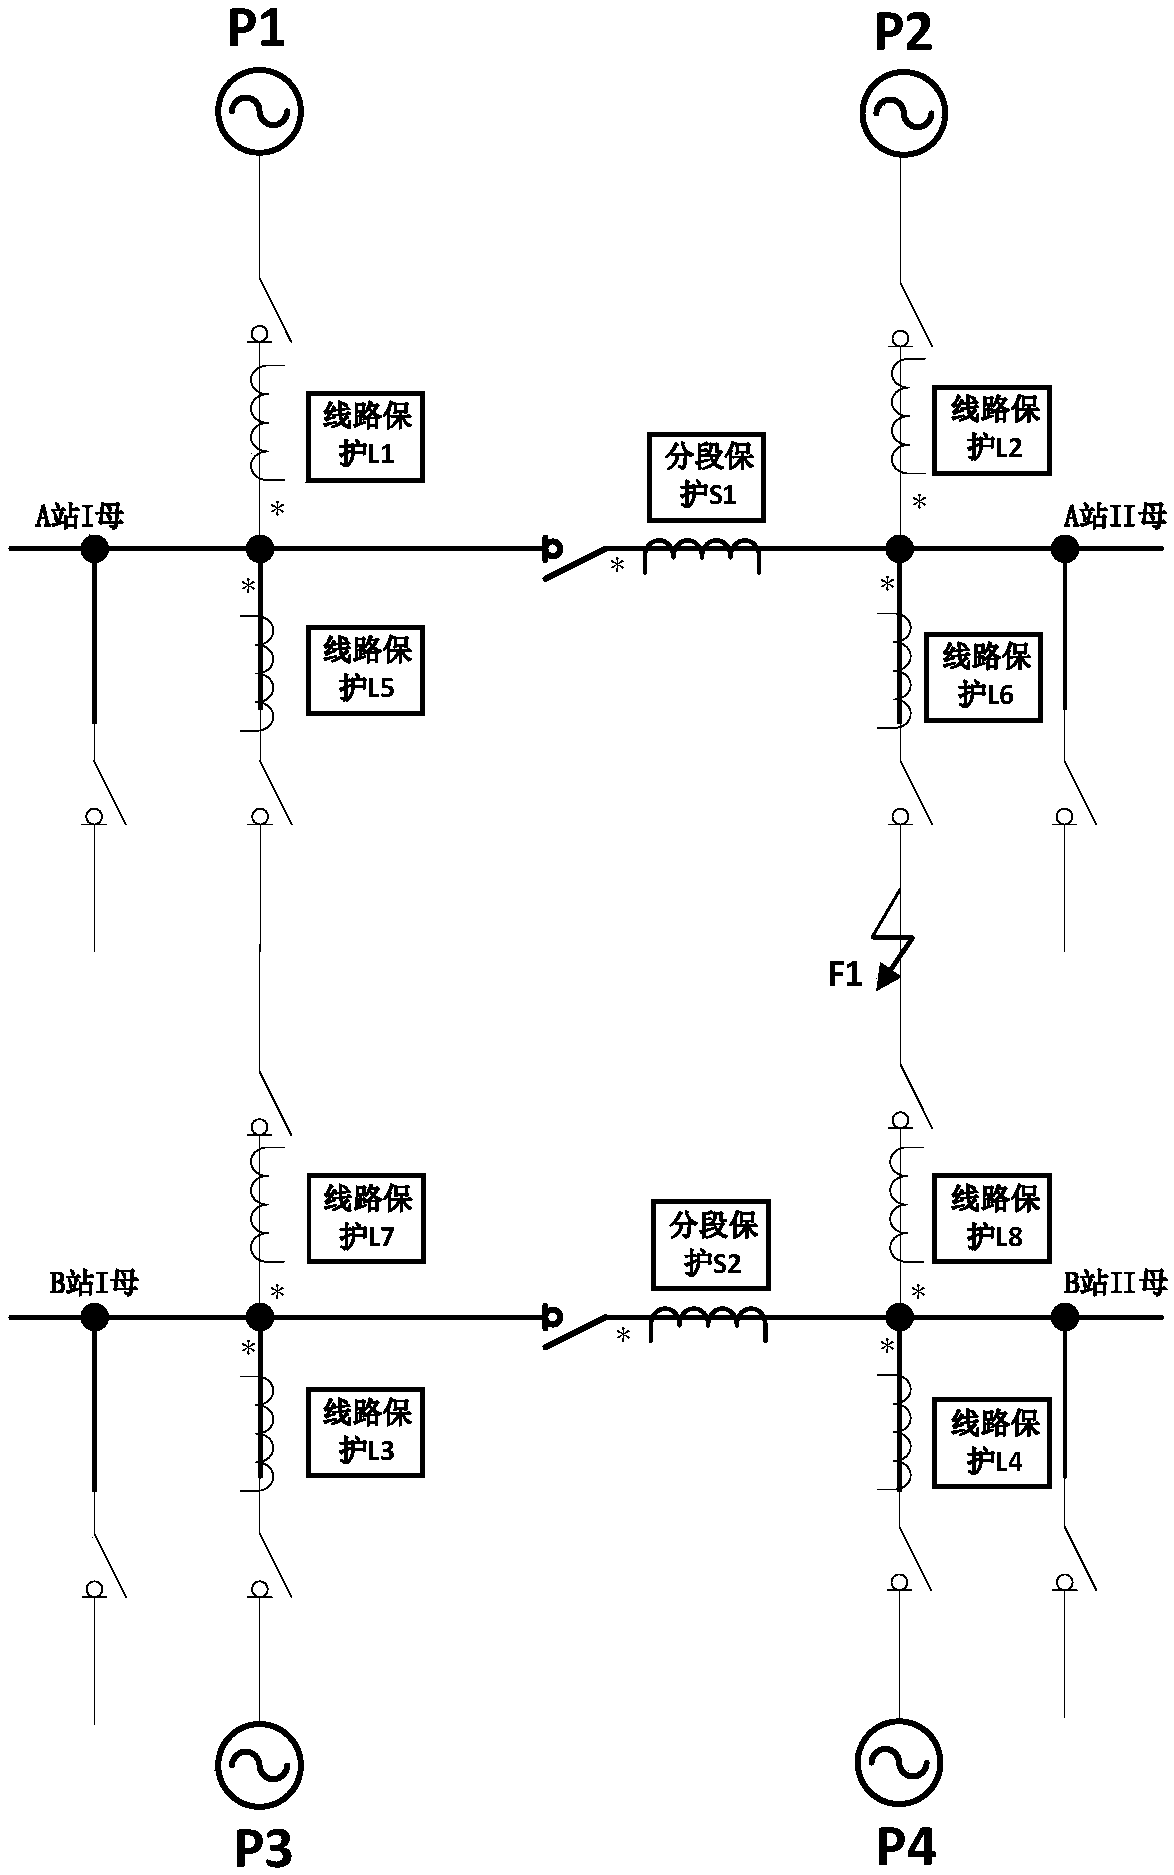 Fully-adaptive skip-level-protection-preventing method suitable for complex power distribution network